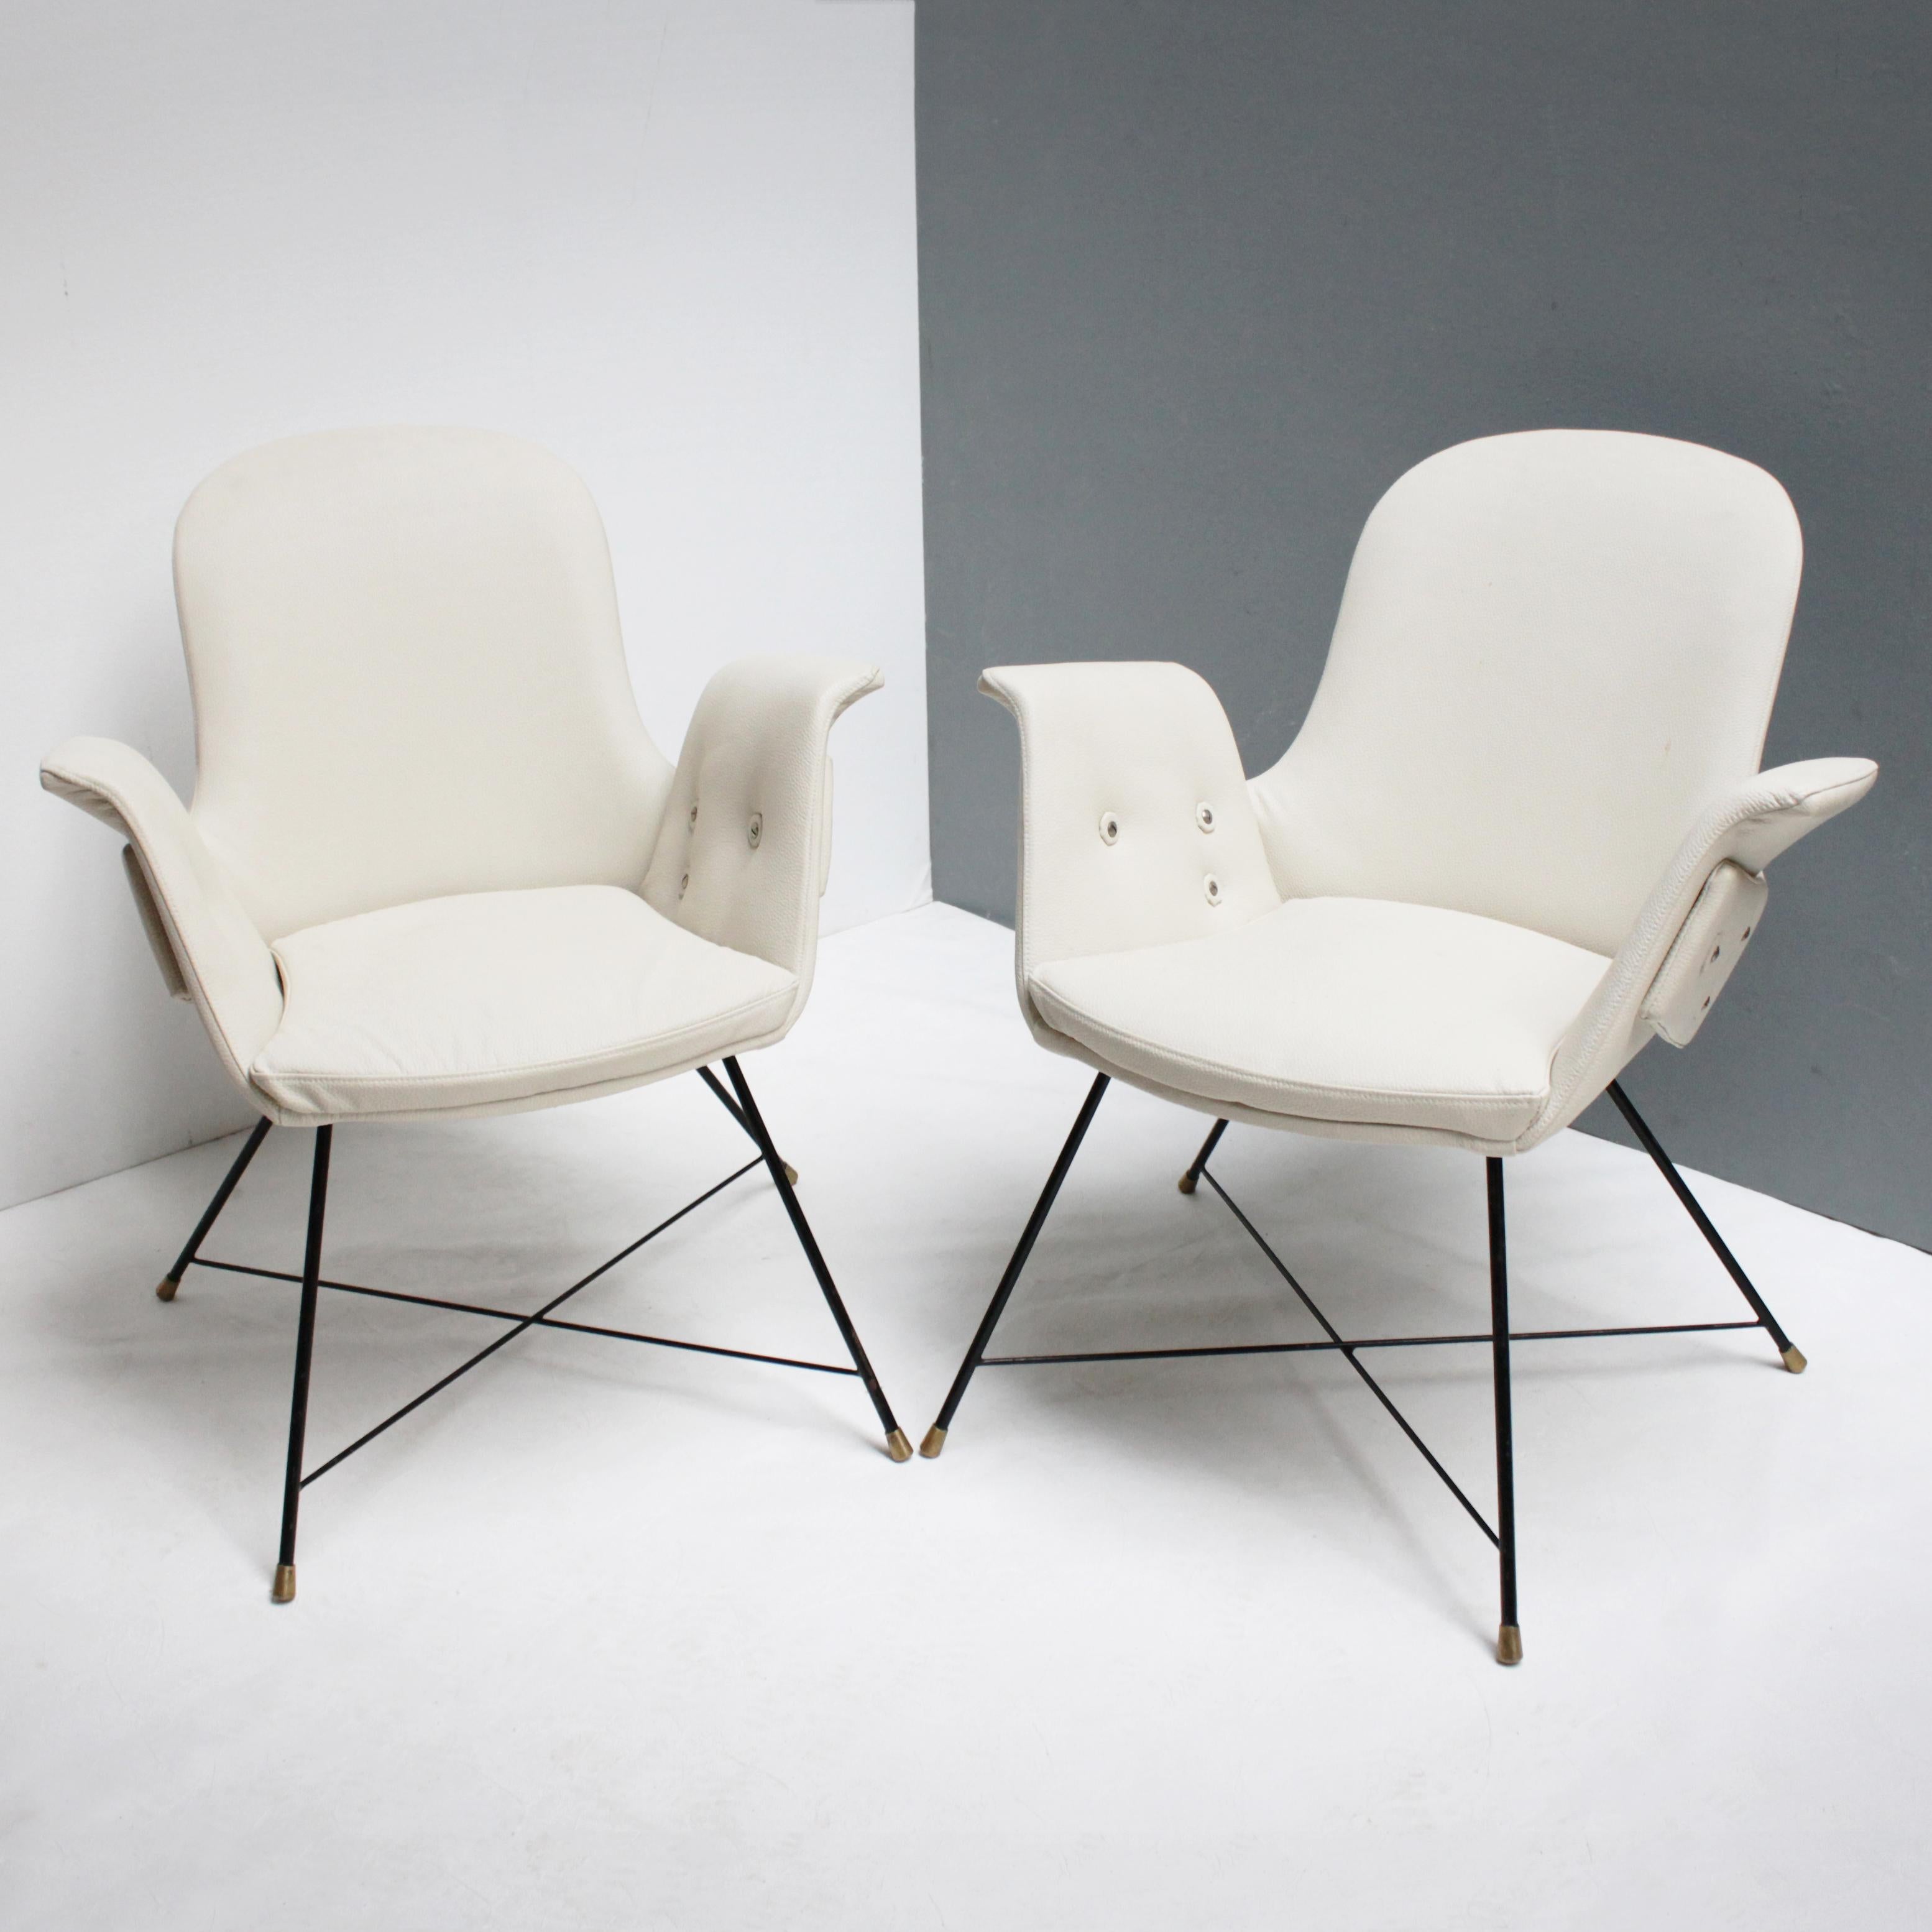 Pair of rare armchairs by Augusto Bozzi for Saporiti, Italy.
Where Vittorio Introini, Alberto Rosselli and Giovanni Offredi shaped the image of Fratelli Saporiti during the 1960s and 1970s, it was Augusto Bozzi (1924-1982) who had put this Italian